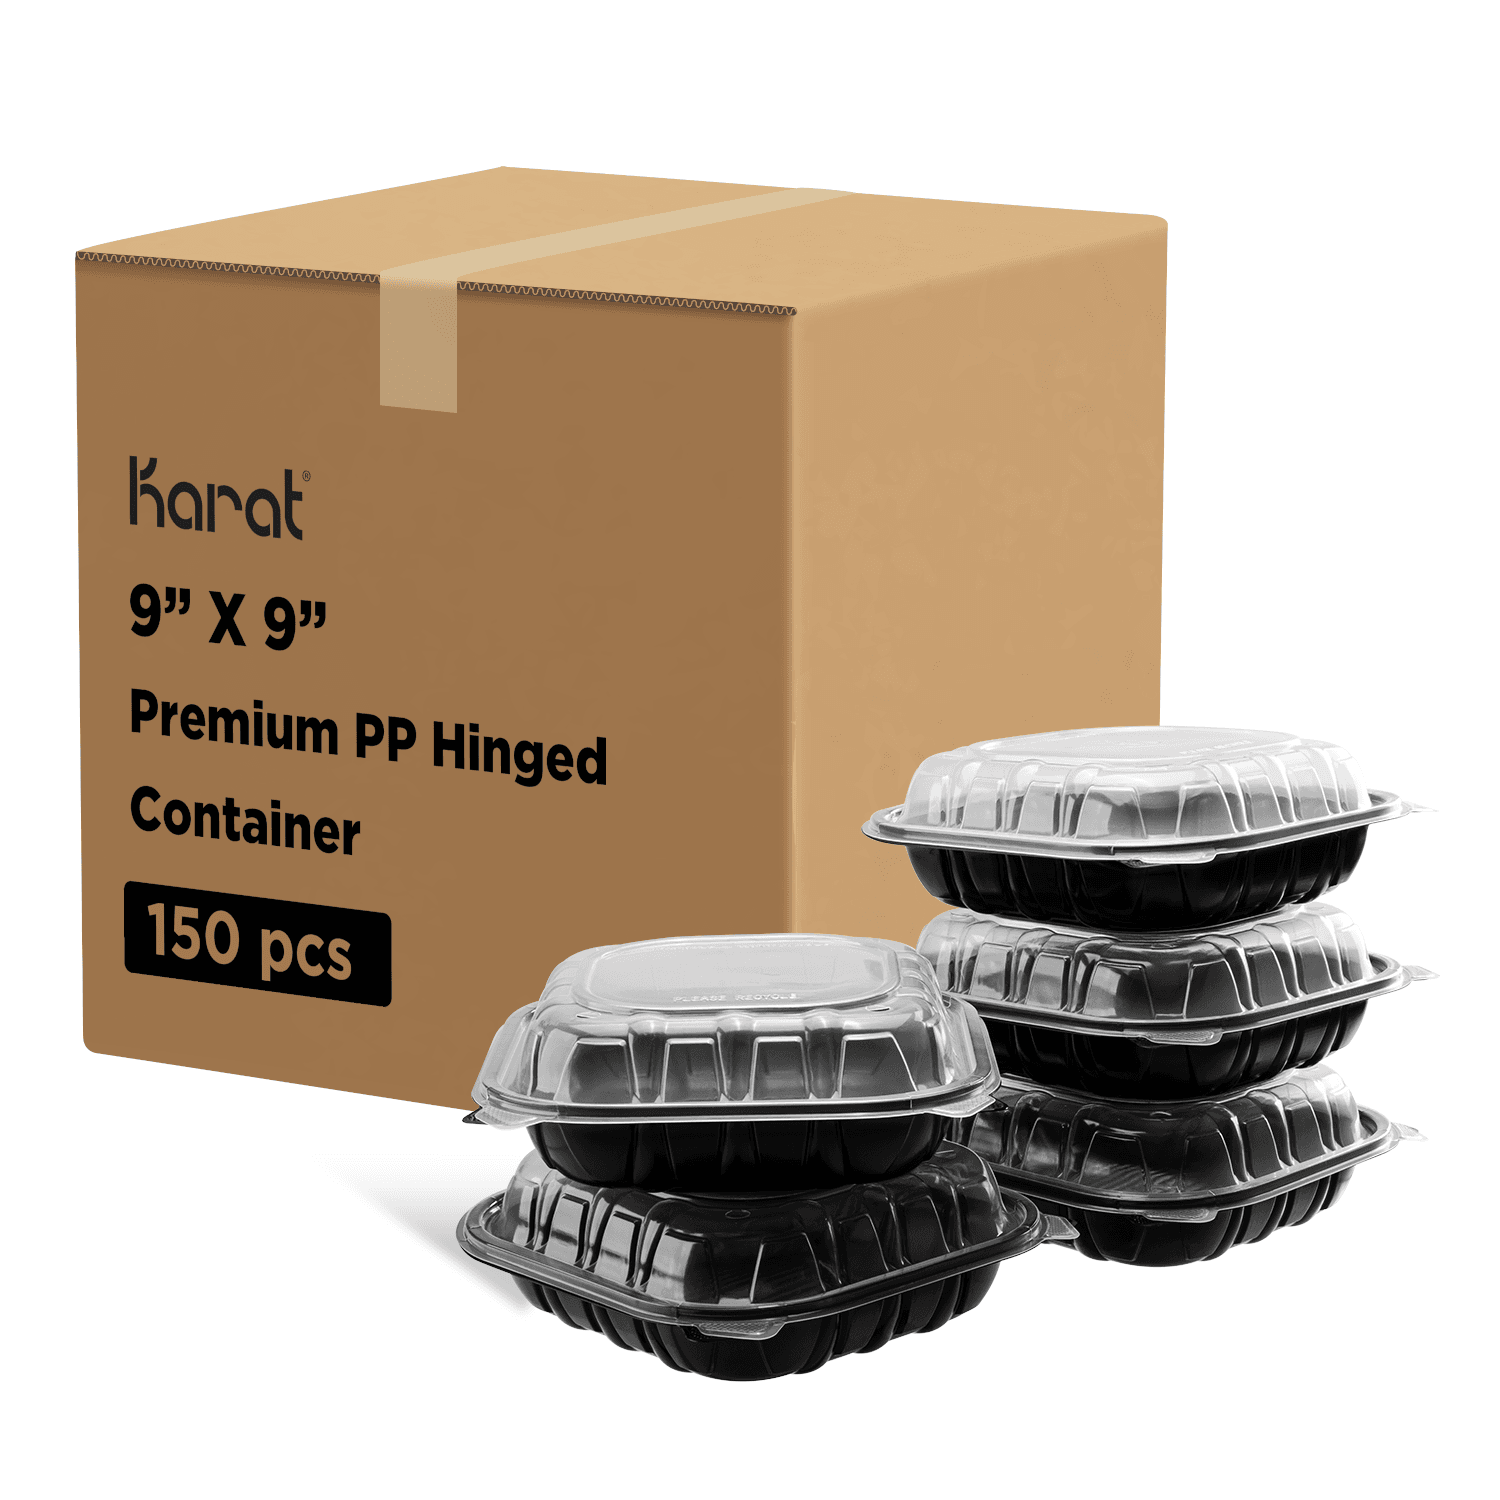 Karat 9"x 9" Premium PP Hinged Container stacked next to packaging